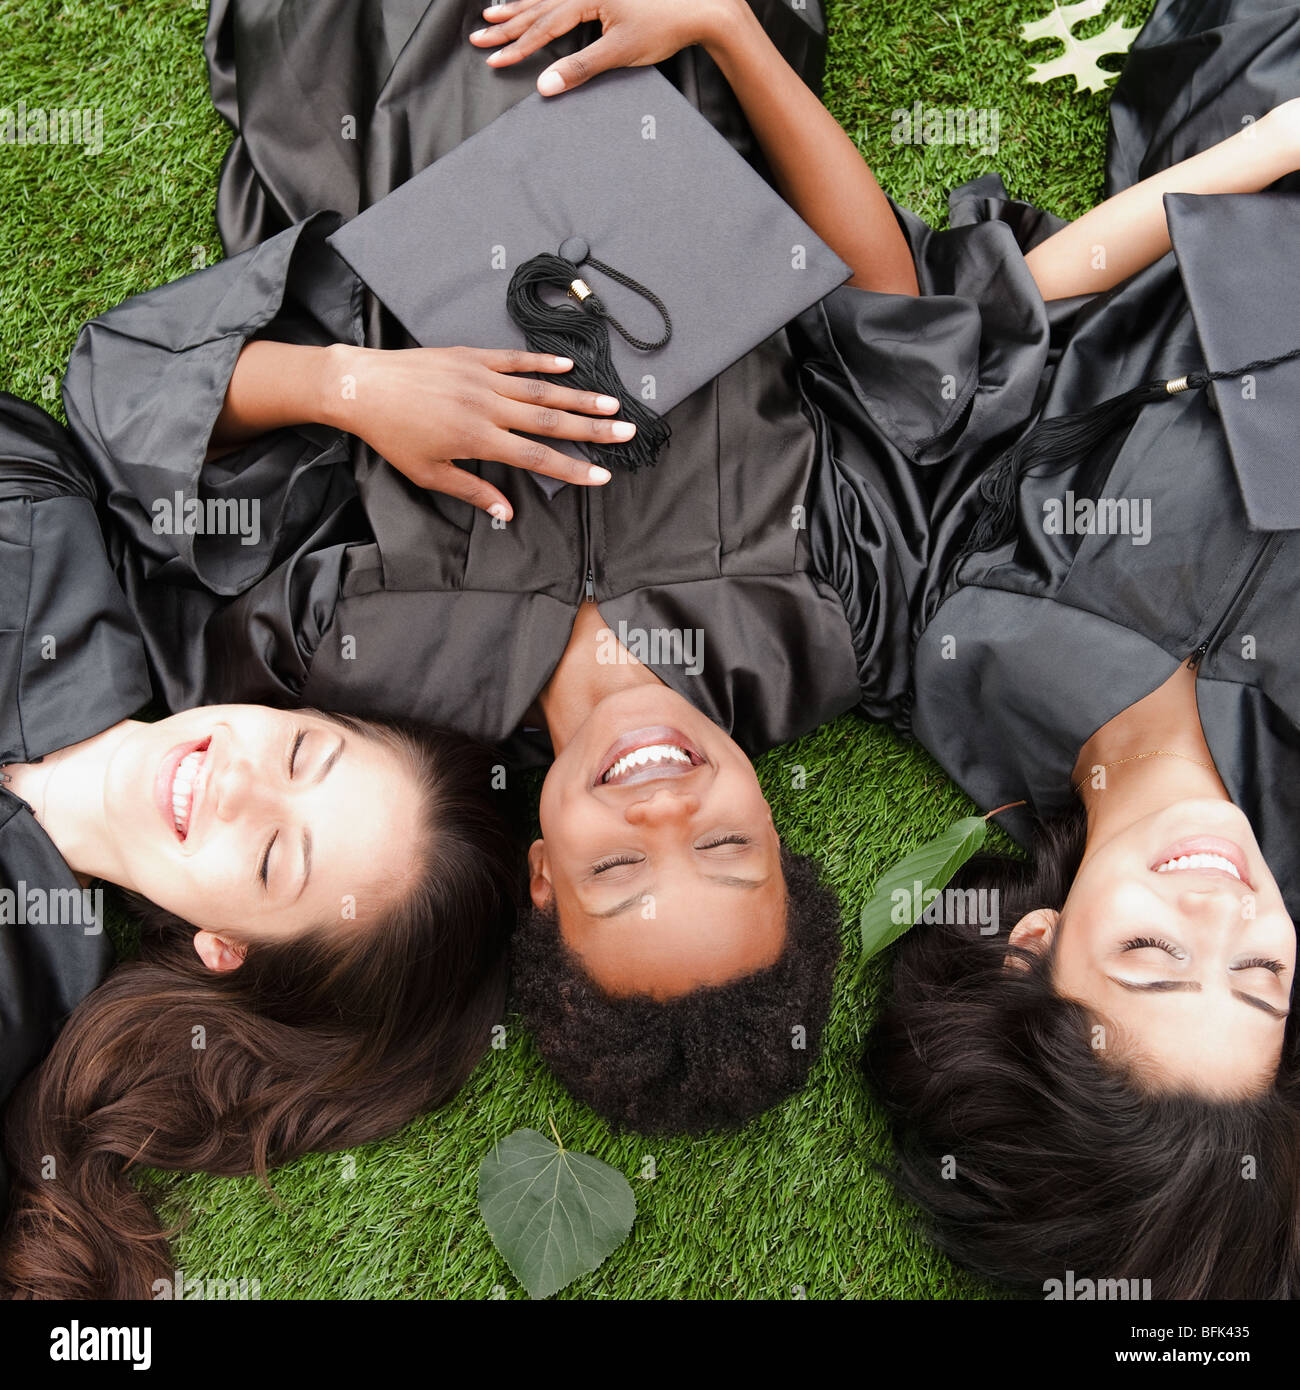 Friends in caps and gowns laying in grass Stock Photo